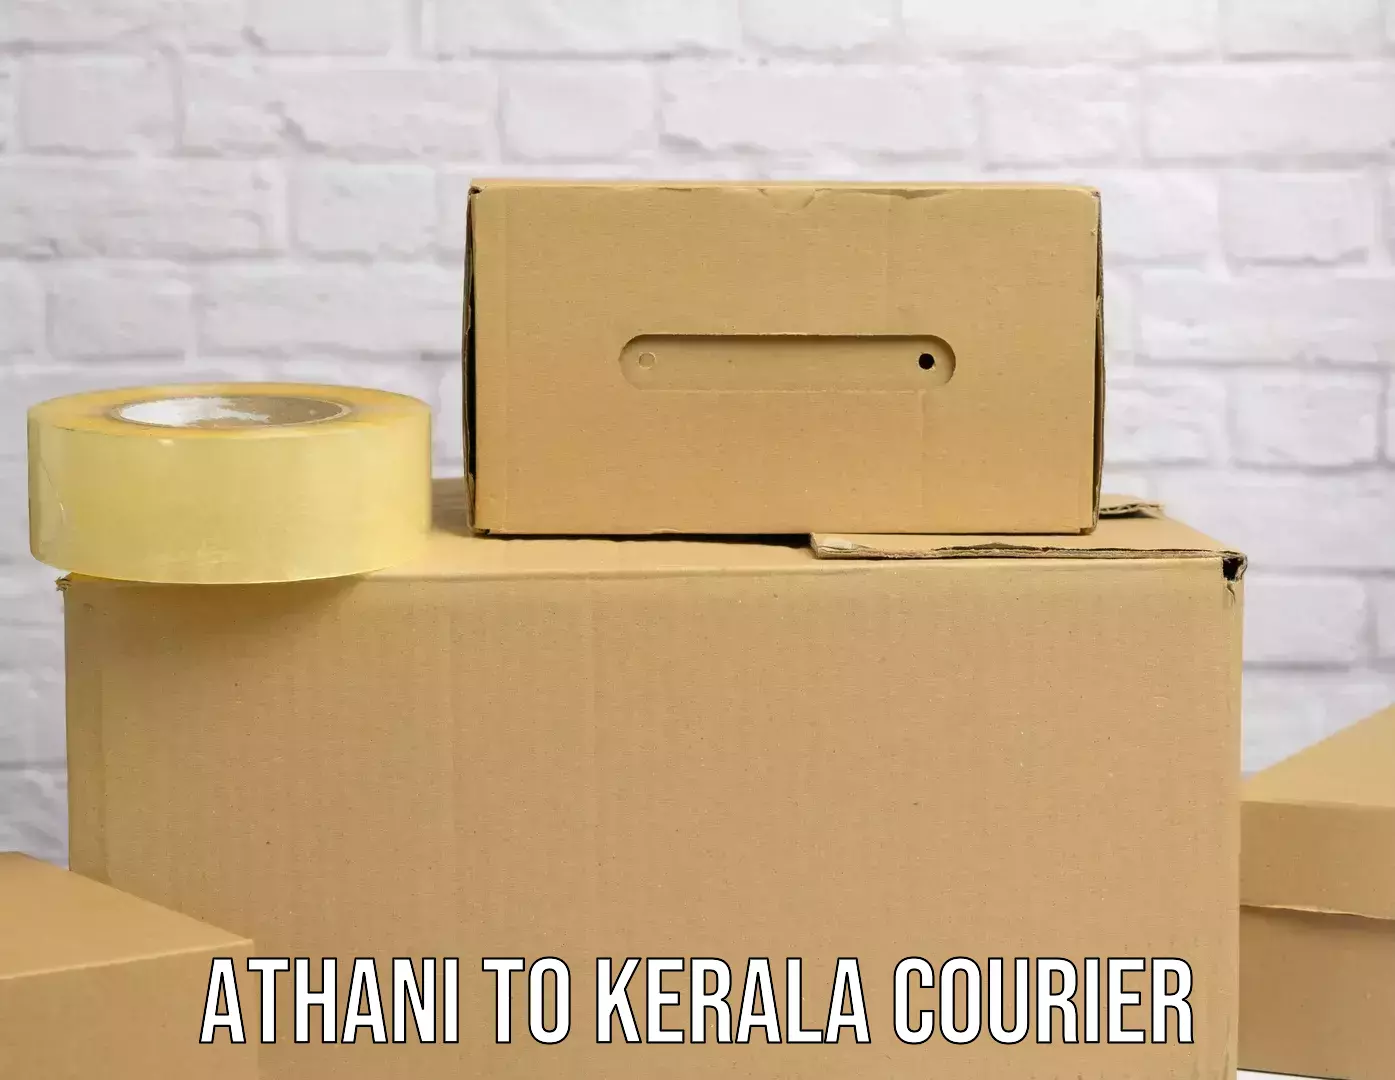 Modern courier technology Athani to Nochad